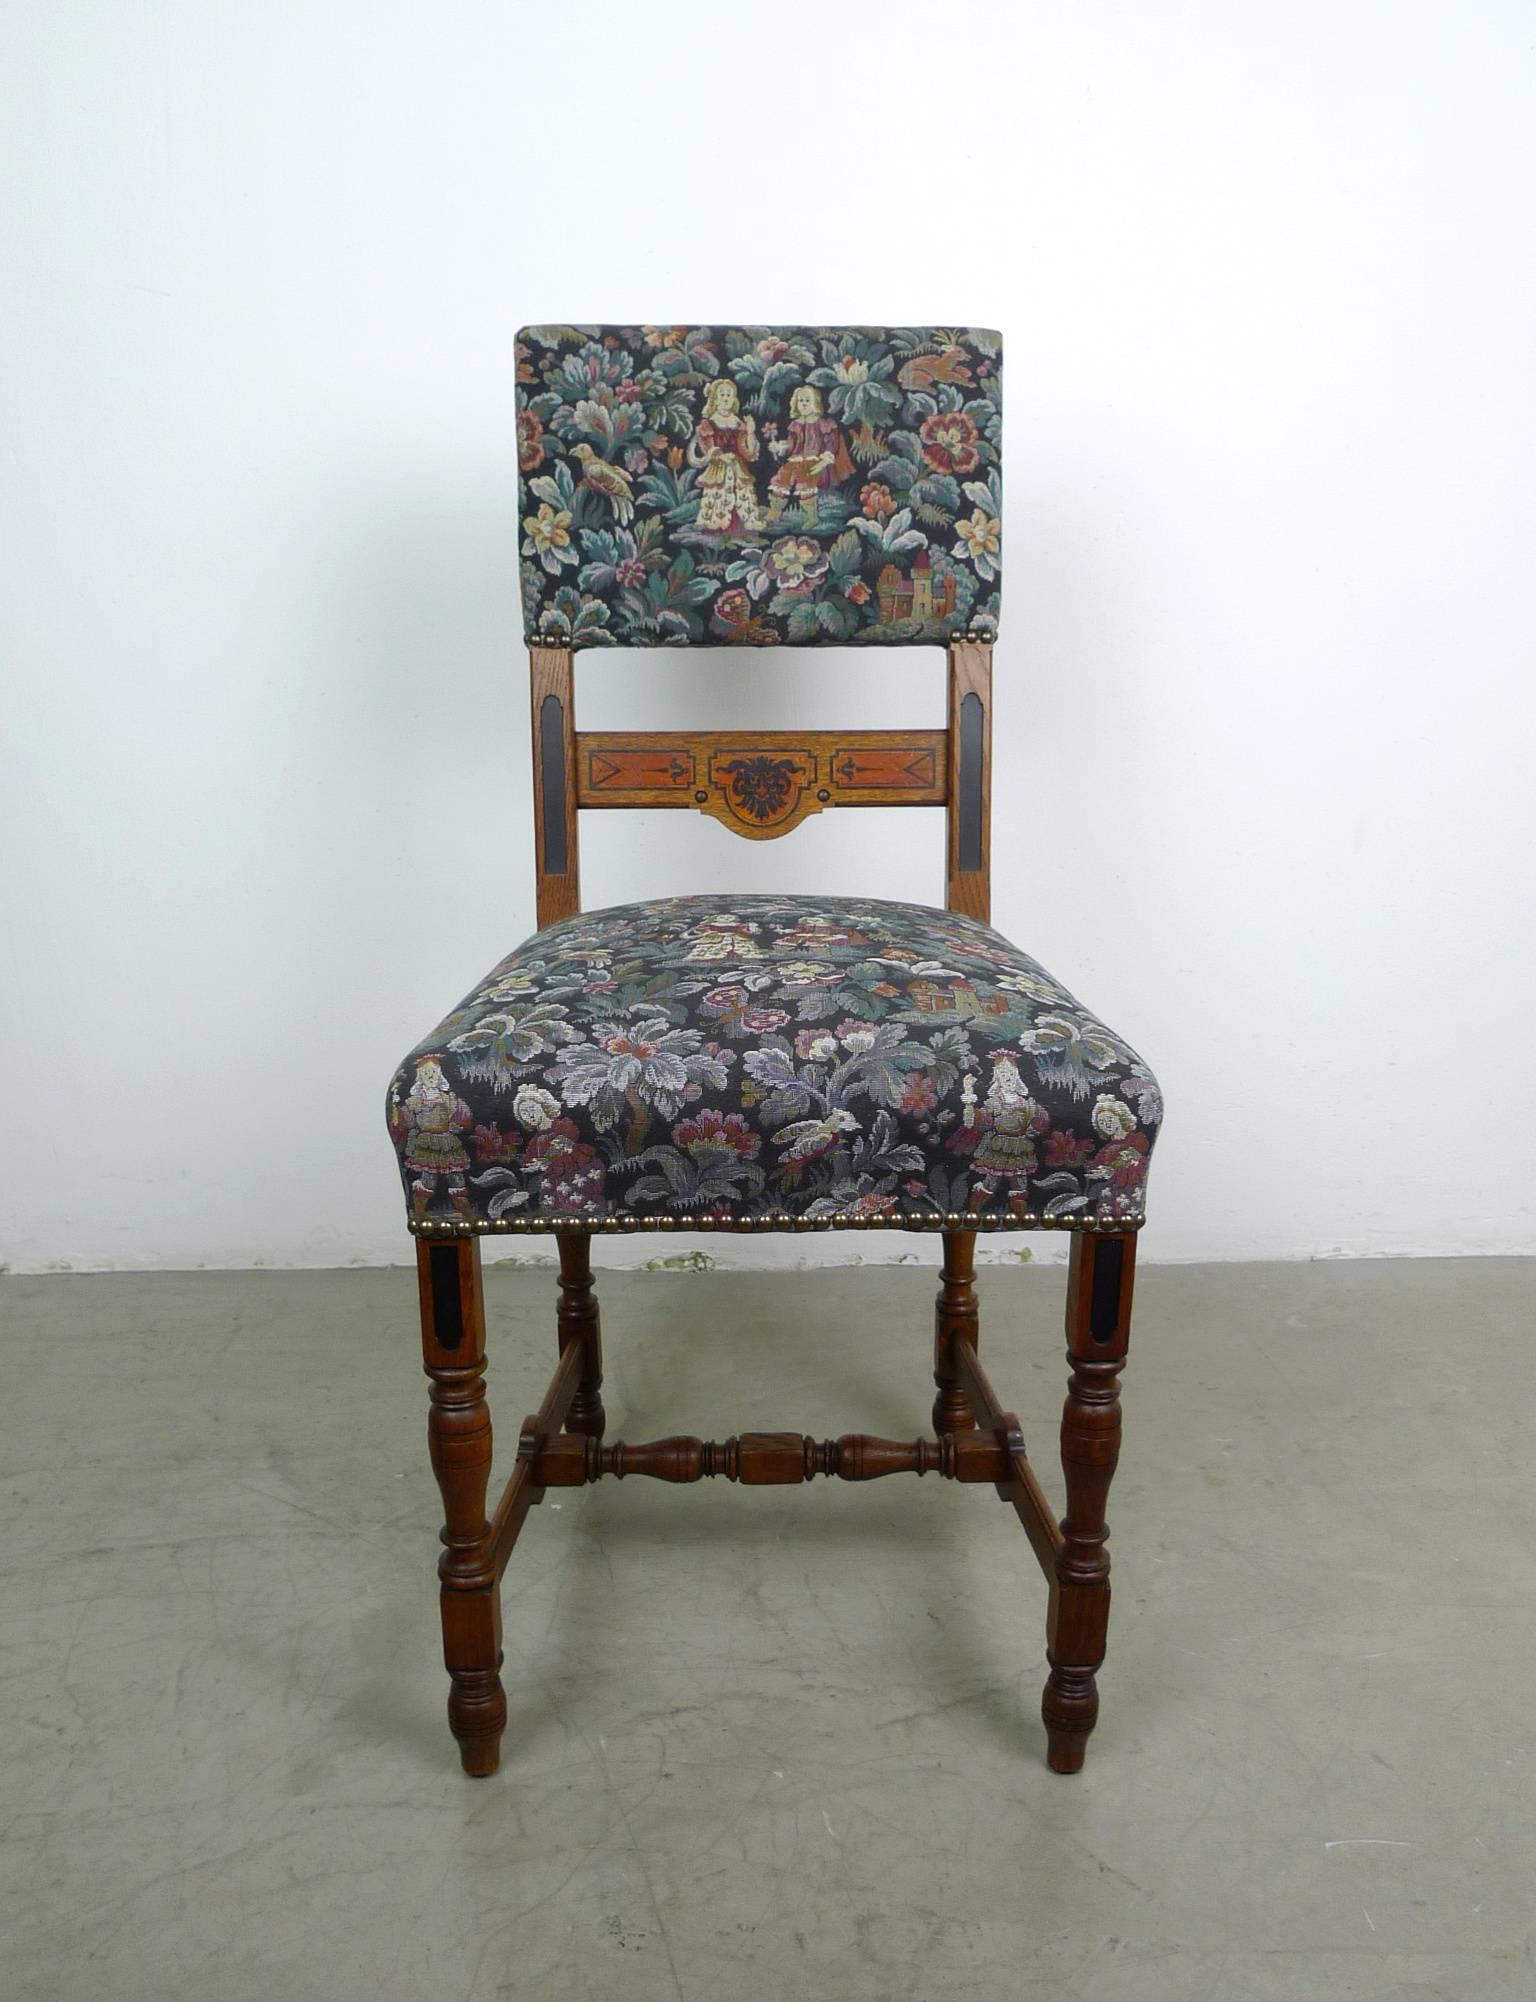 Set of six antique German dining chairs from the 1890s.
The frames of the chairs are made of dark oak. The feet and the lower traverse are elaborately shaped. The lower bands and the backrest band are additionally painted artful. The fabric shows